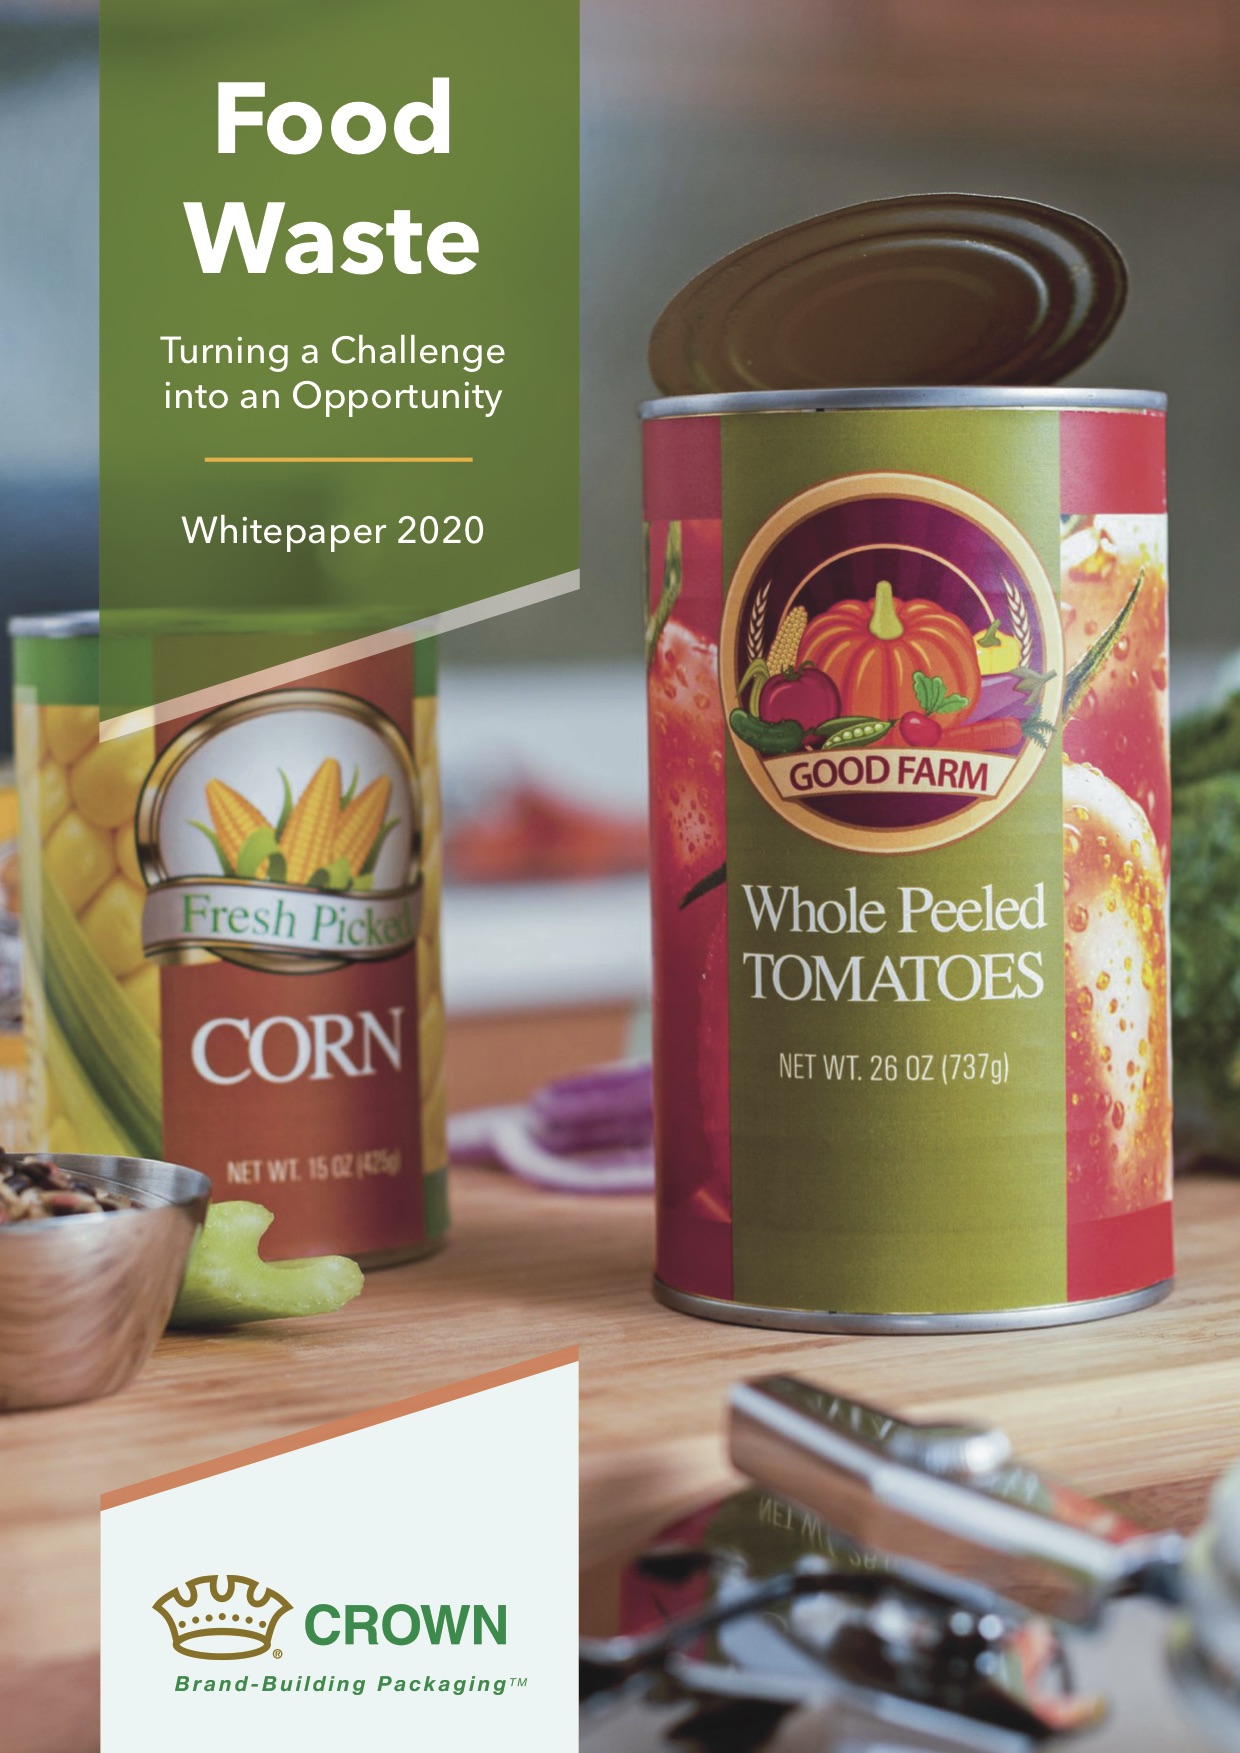 Whitepaper cover, food cans, Crown: Brand-Building Packaging